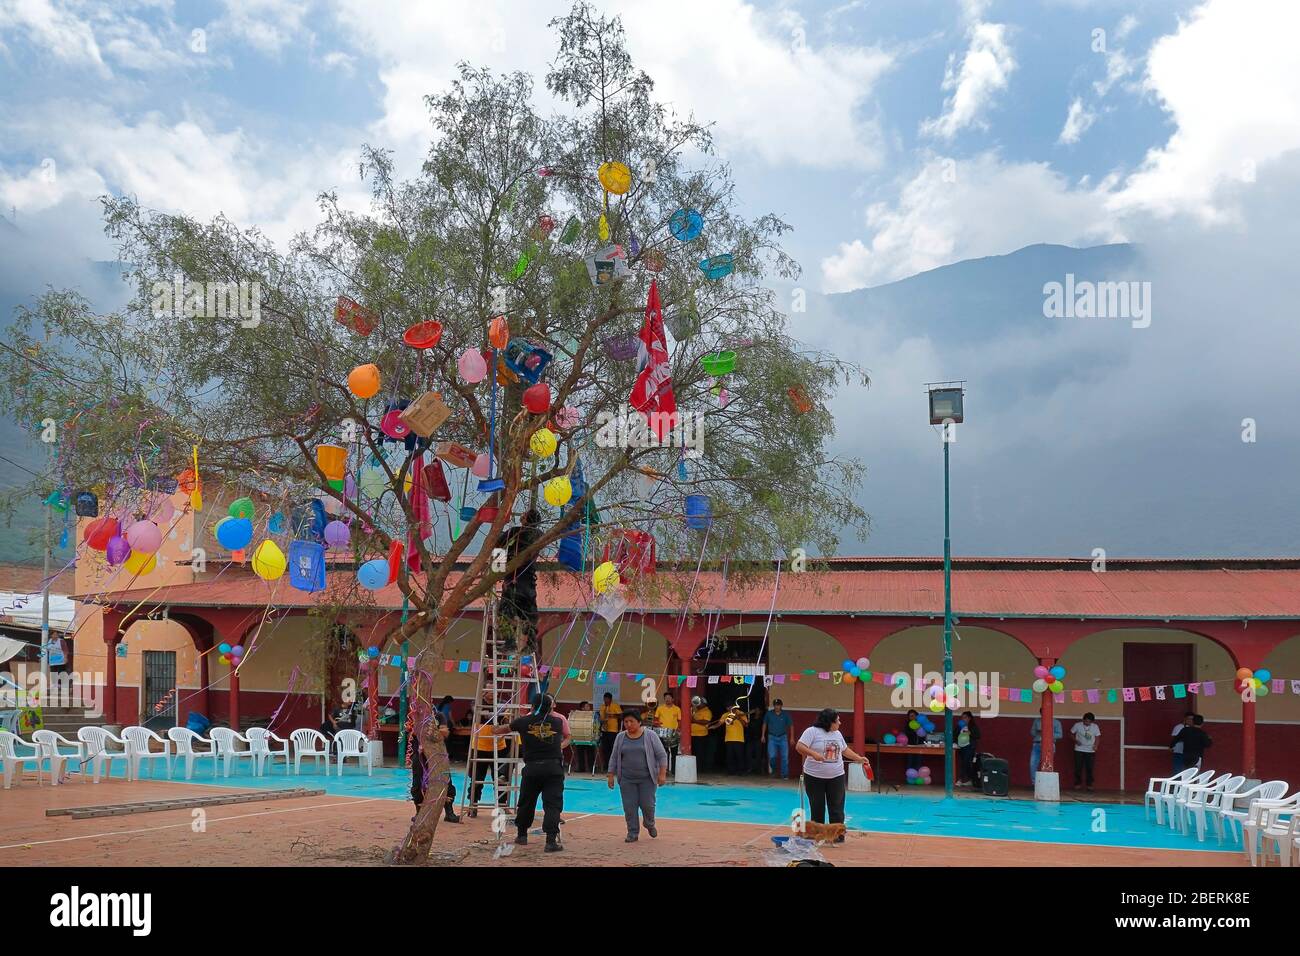 Callhuanca, Lima. February 16, 2020 - Scene of the preparations for the popular party called 'Yunza' which consists of dancing and knocking down the t Stock Photo